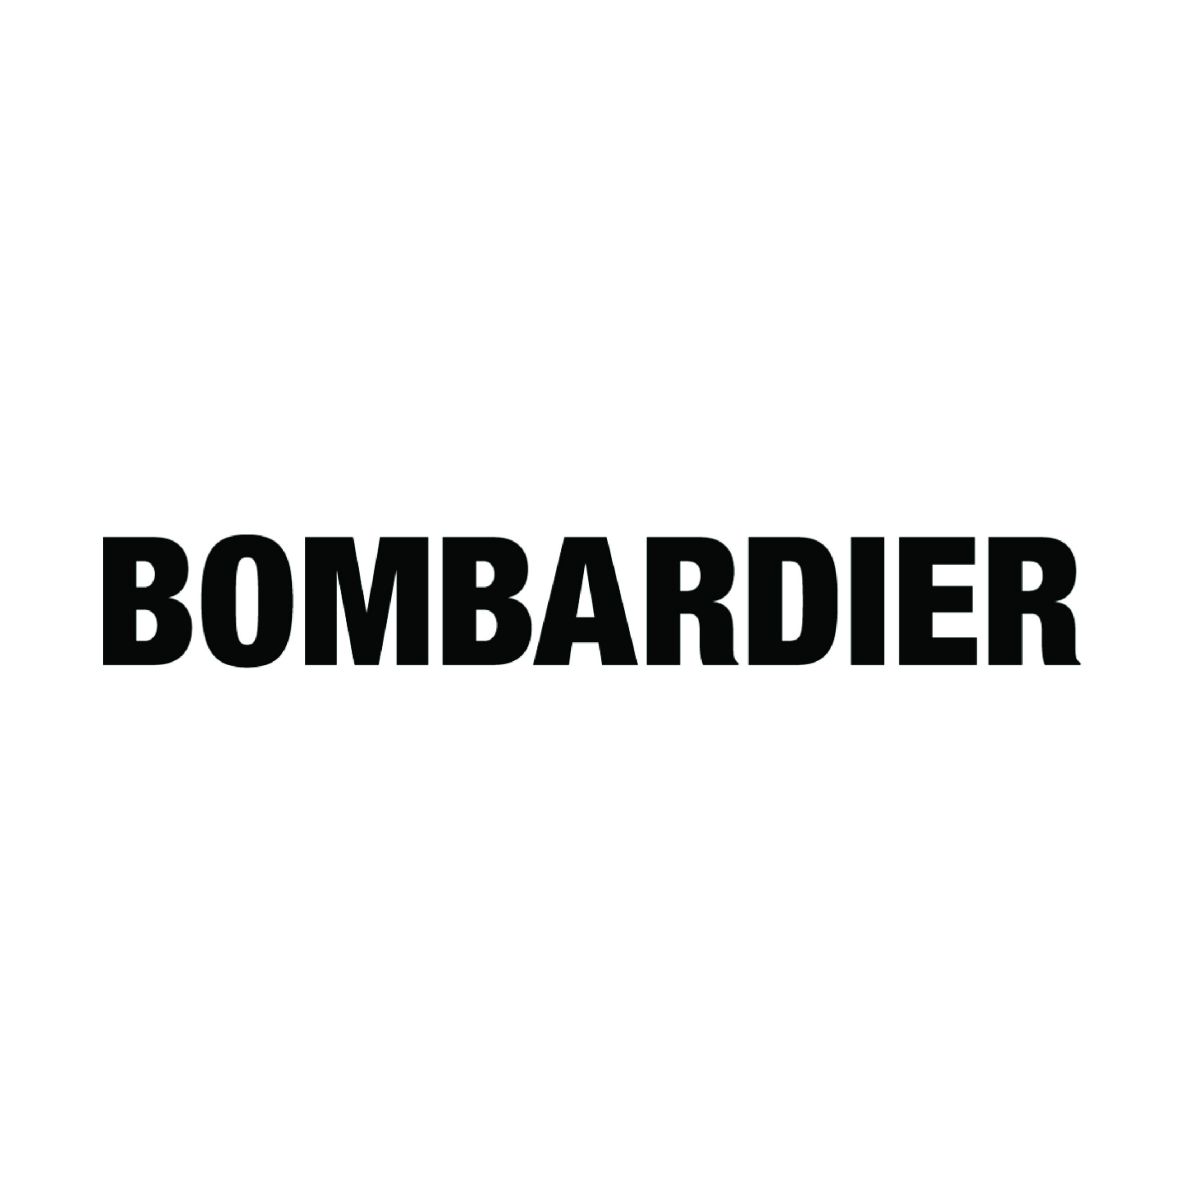 Bombardier-compressed